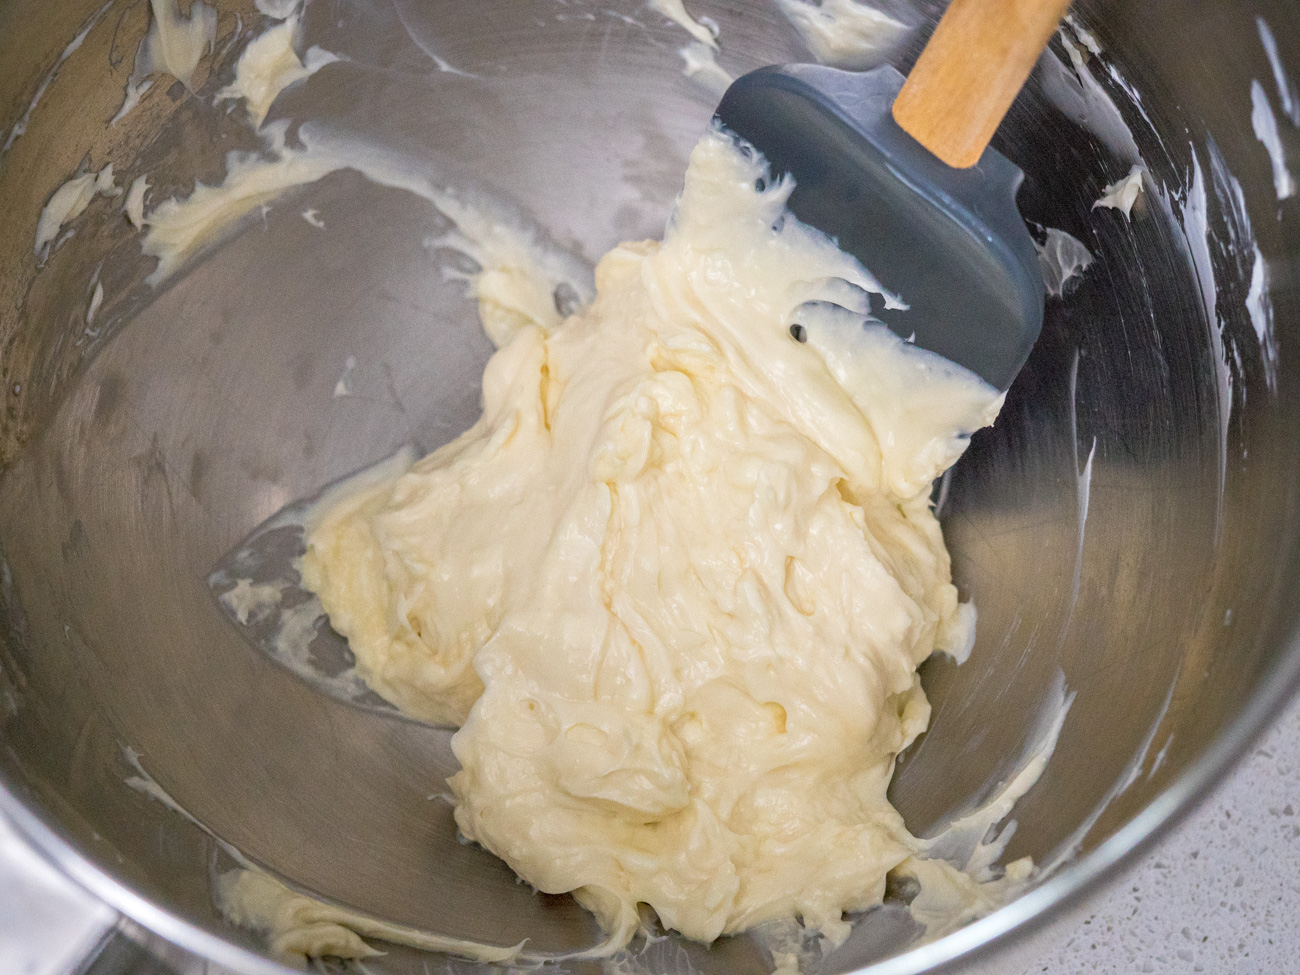 In a large bowl, combine cream cheese, vanilla, and powdered sugar with a hand mixer or a stand mixer.